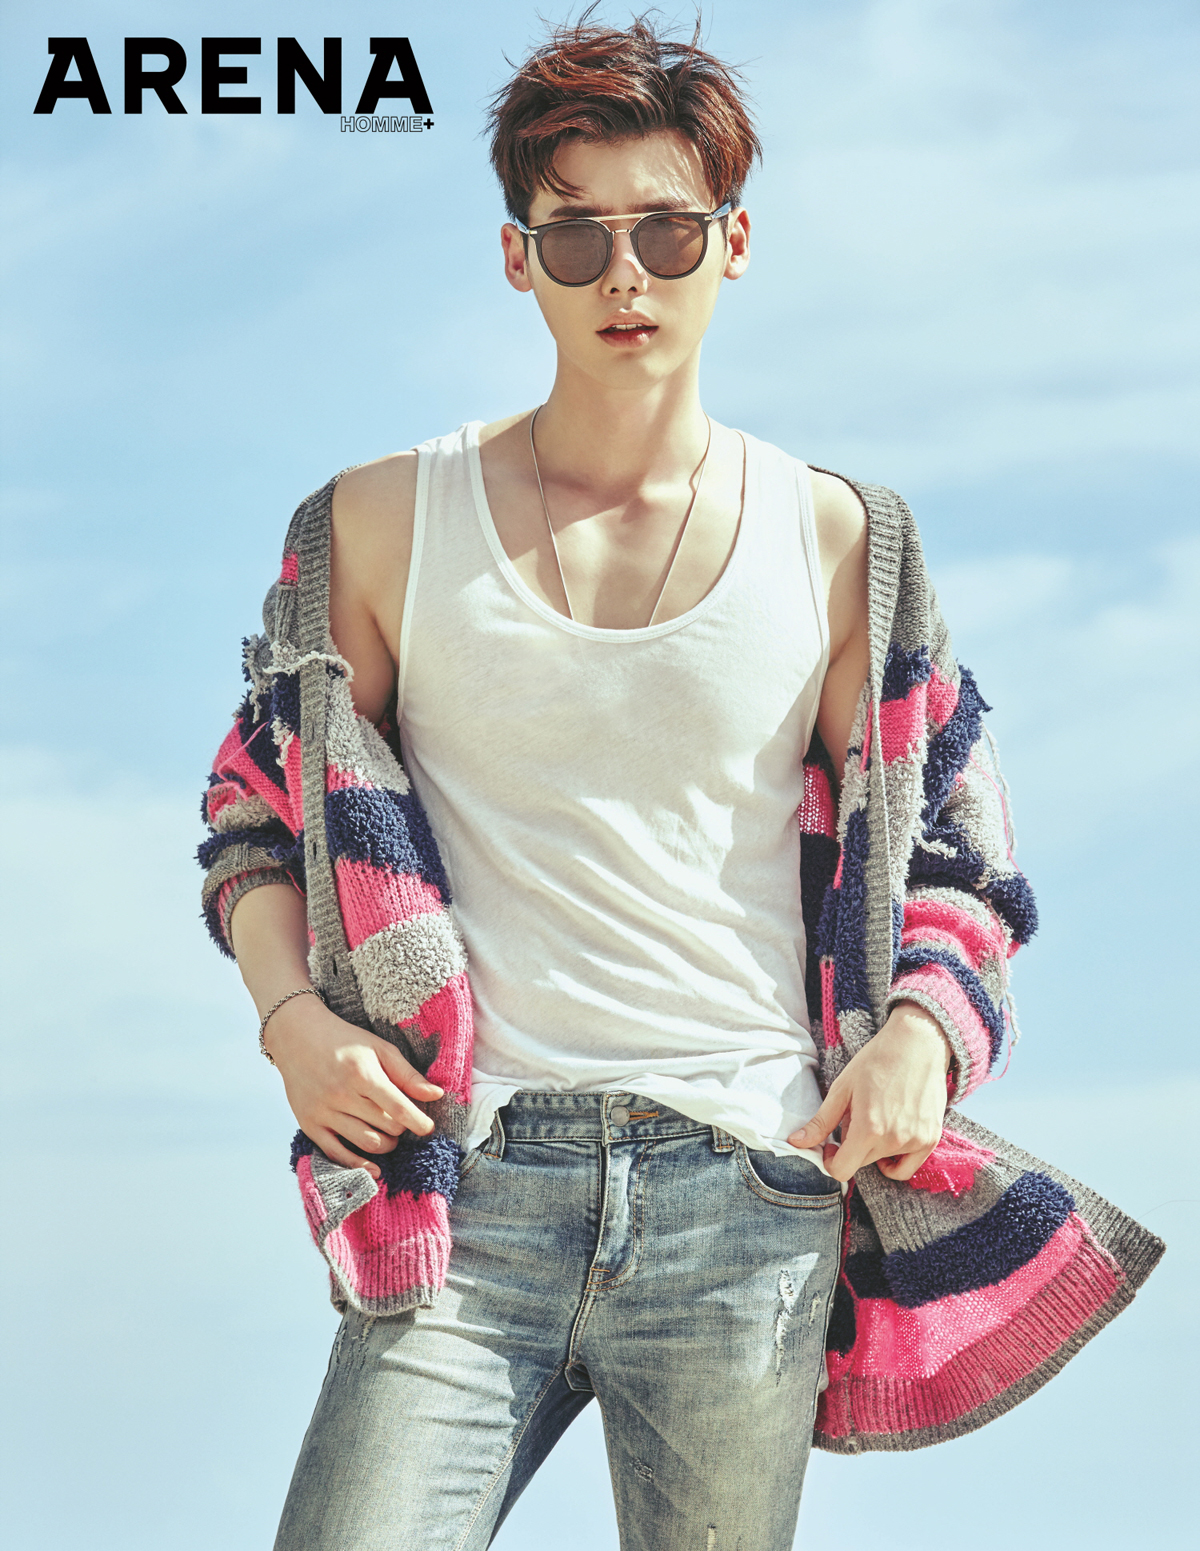 Lee Jong Suk Poses For 'Arena Homme Plus'! :: Daily K Pop News | Latest ...